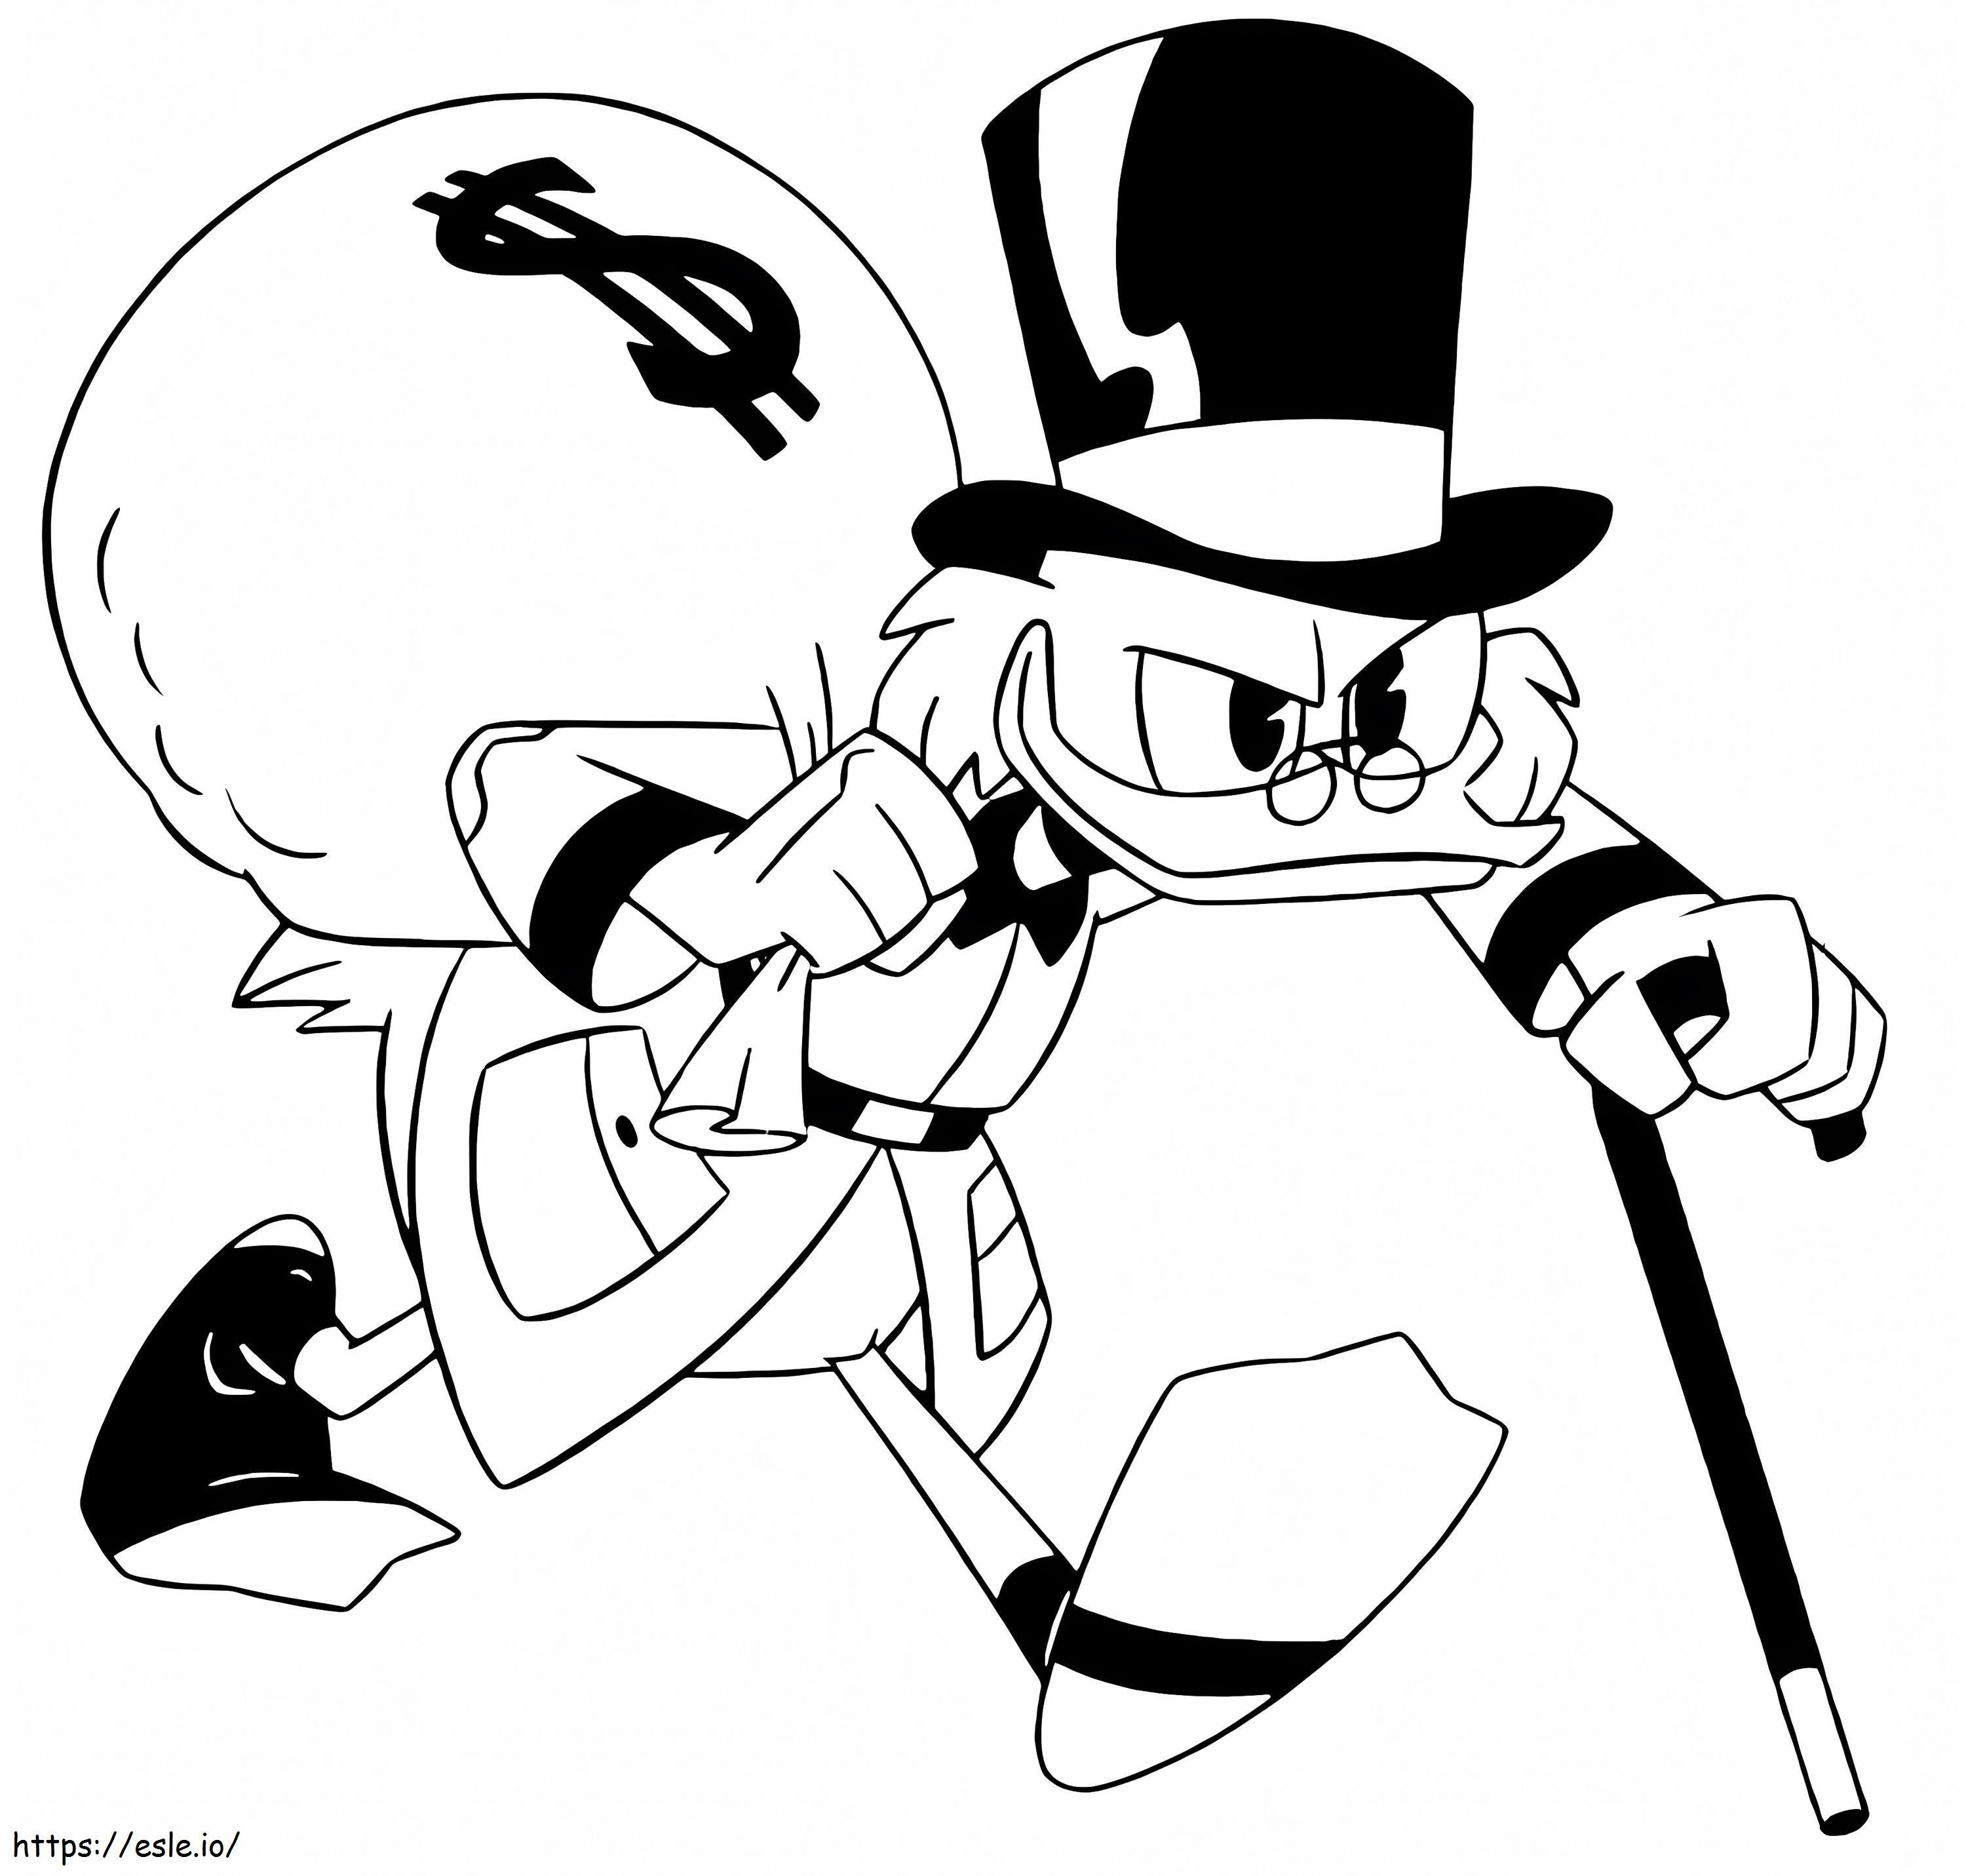 Scrooge McDuck With Money Bag coloring page